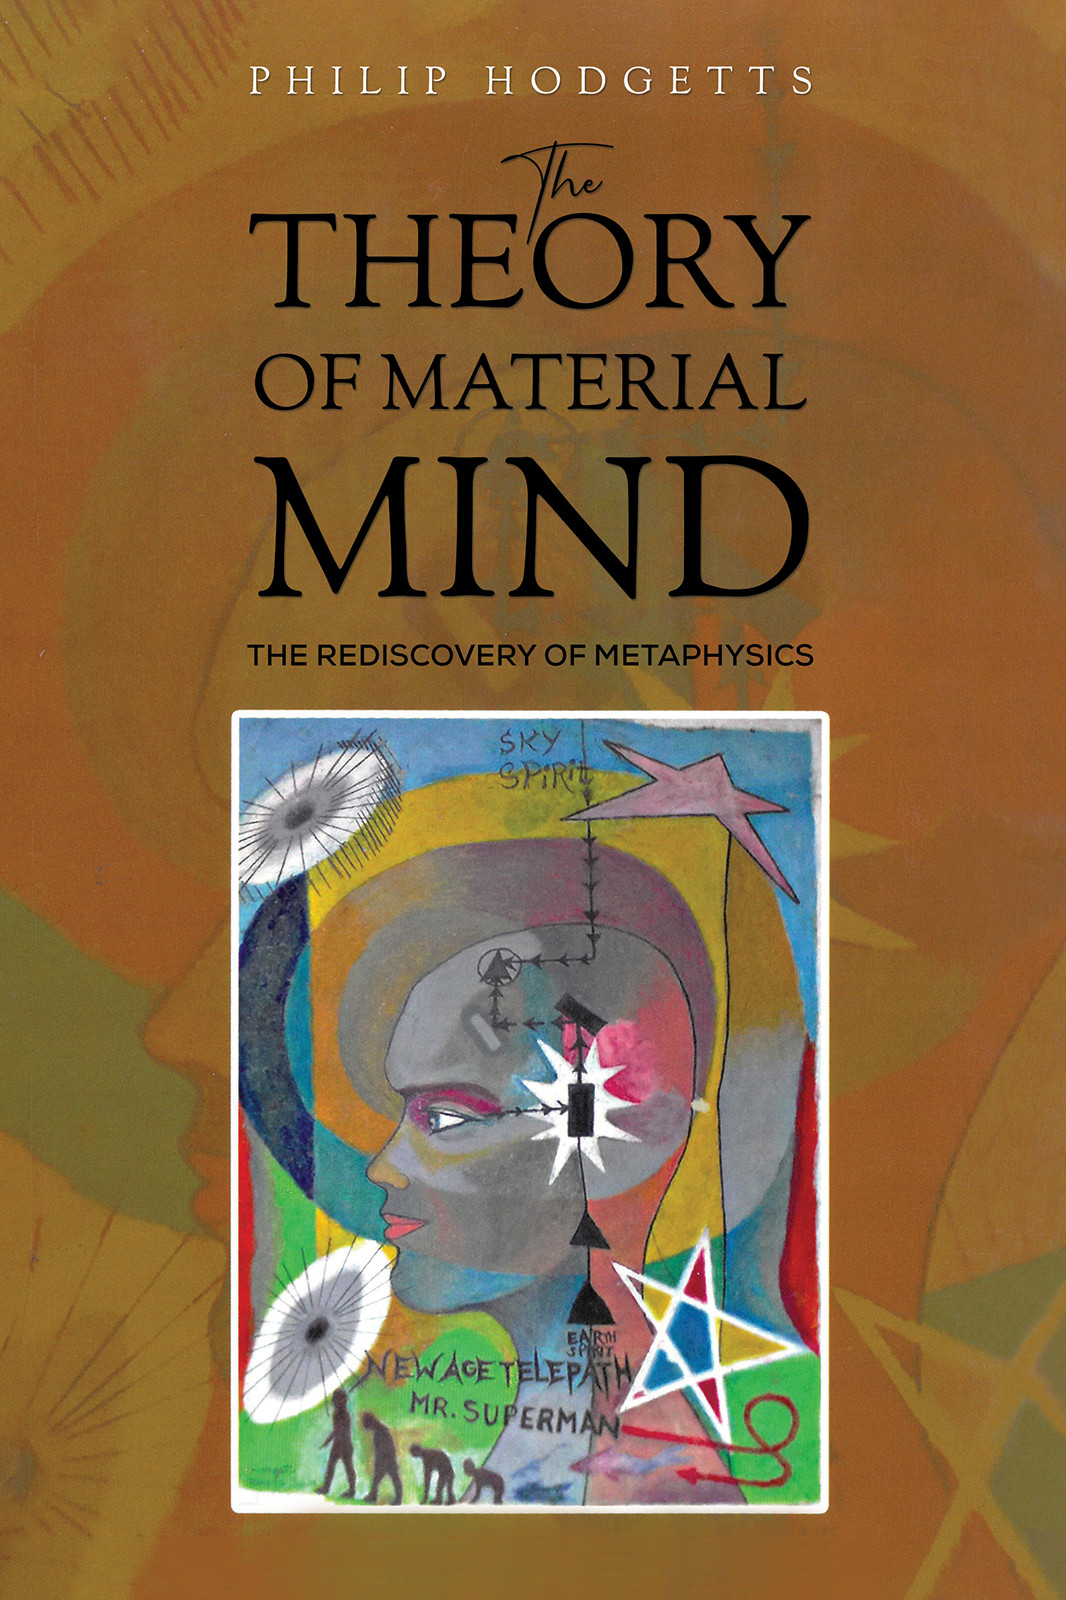 The Theory of Material Mind